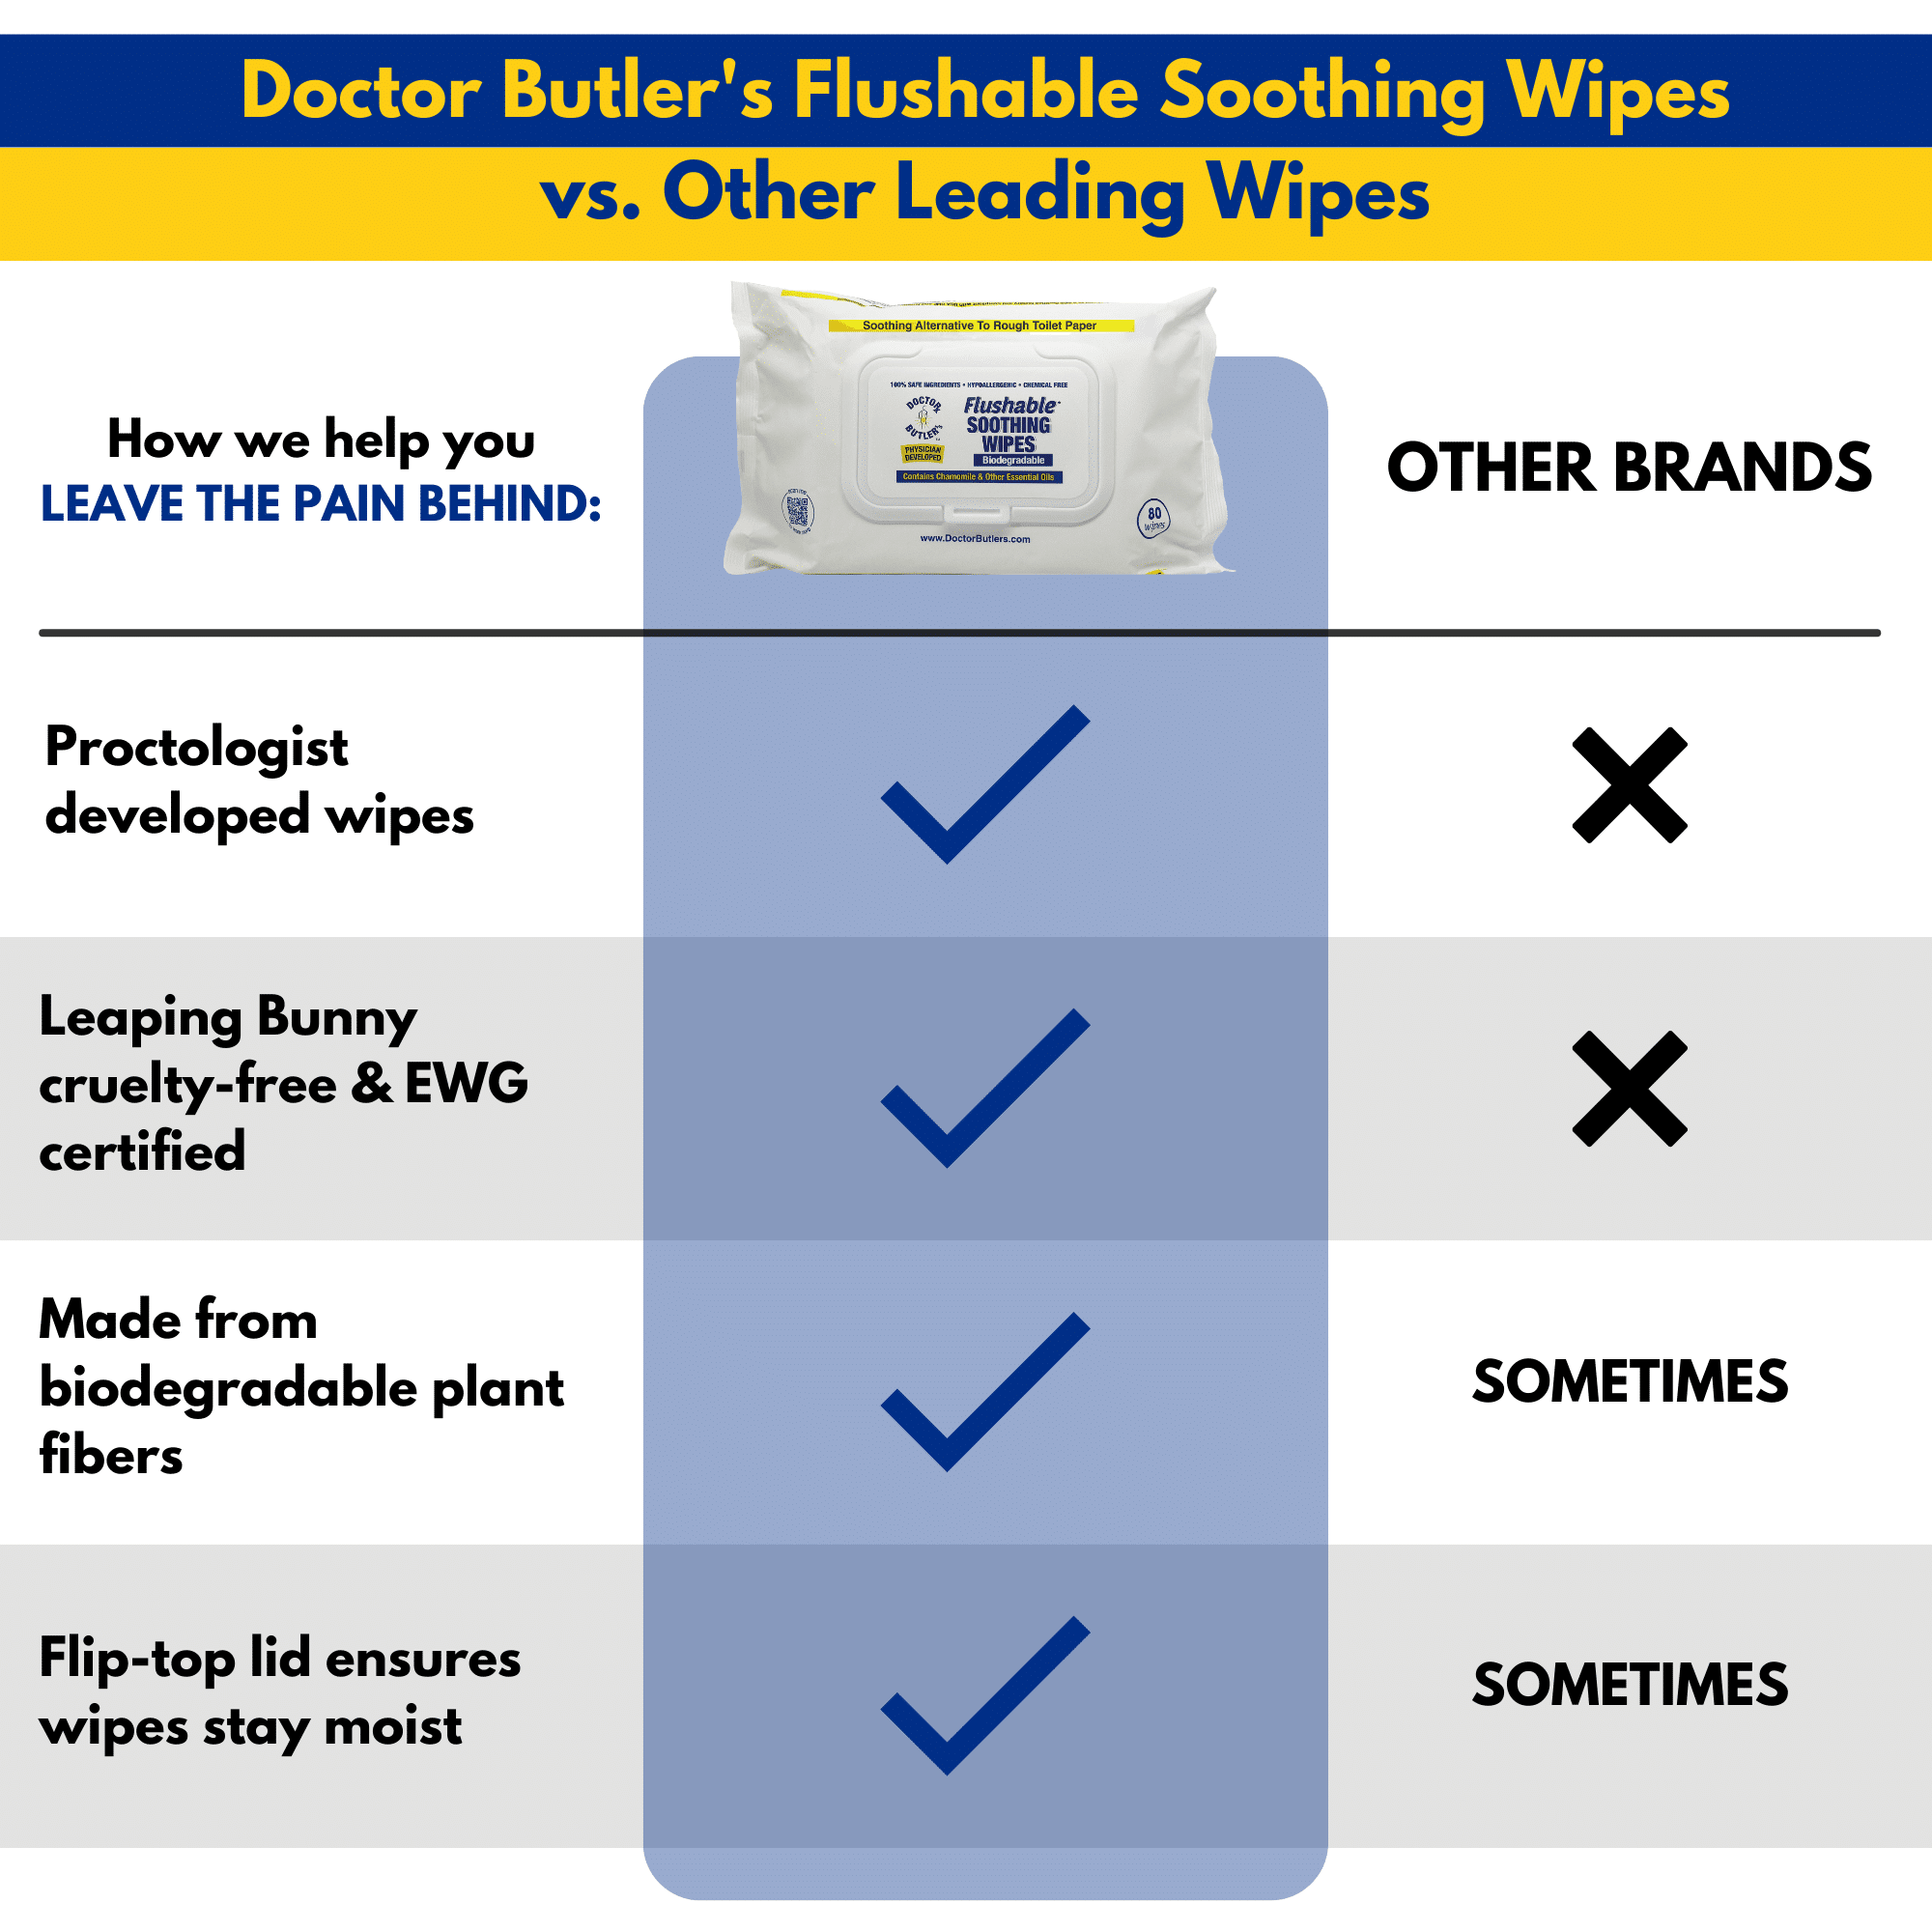 Doctor Butler's Soothing Flushable Wipes